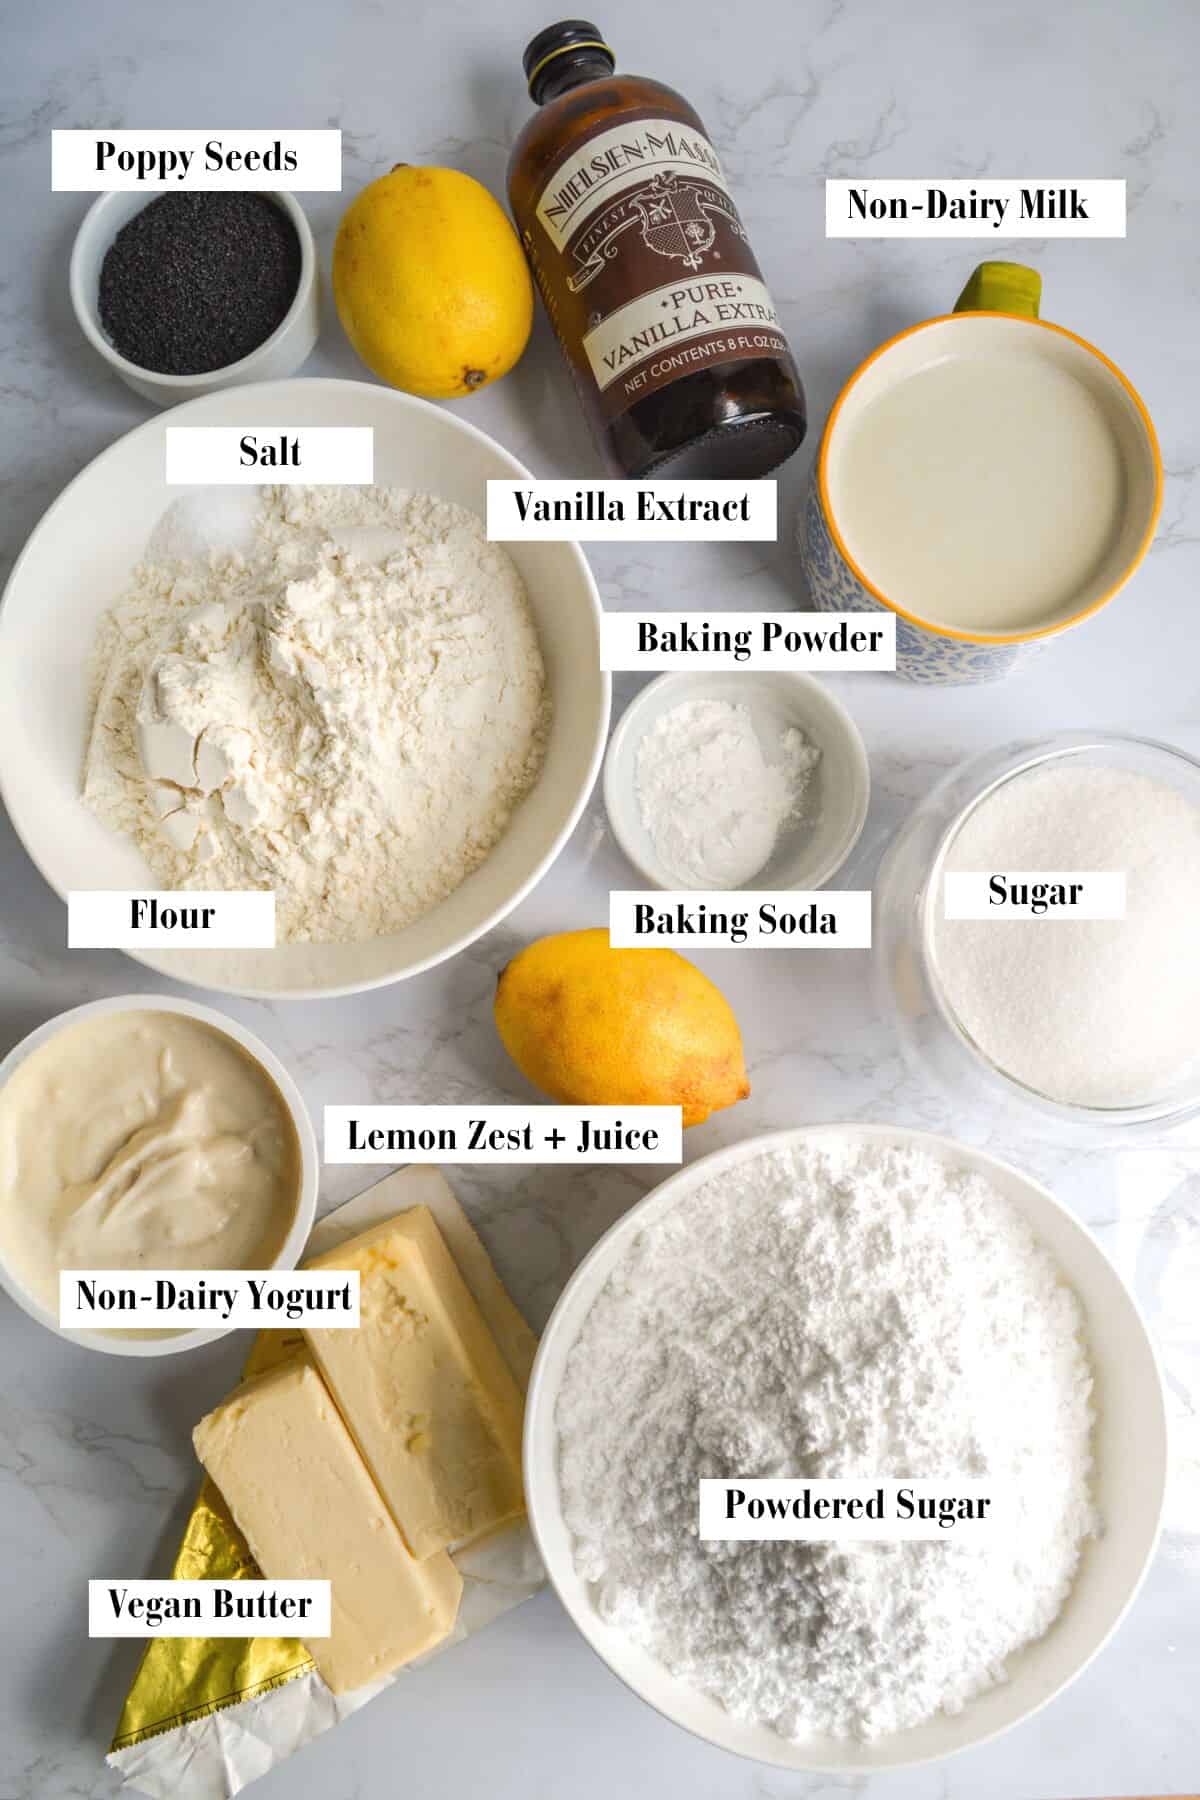 Ingredients needed to make this recipe.